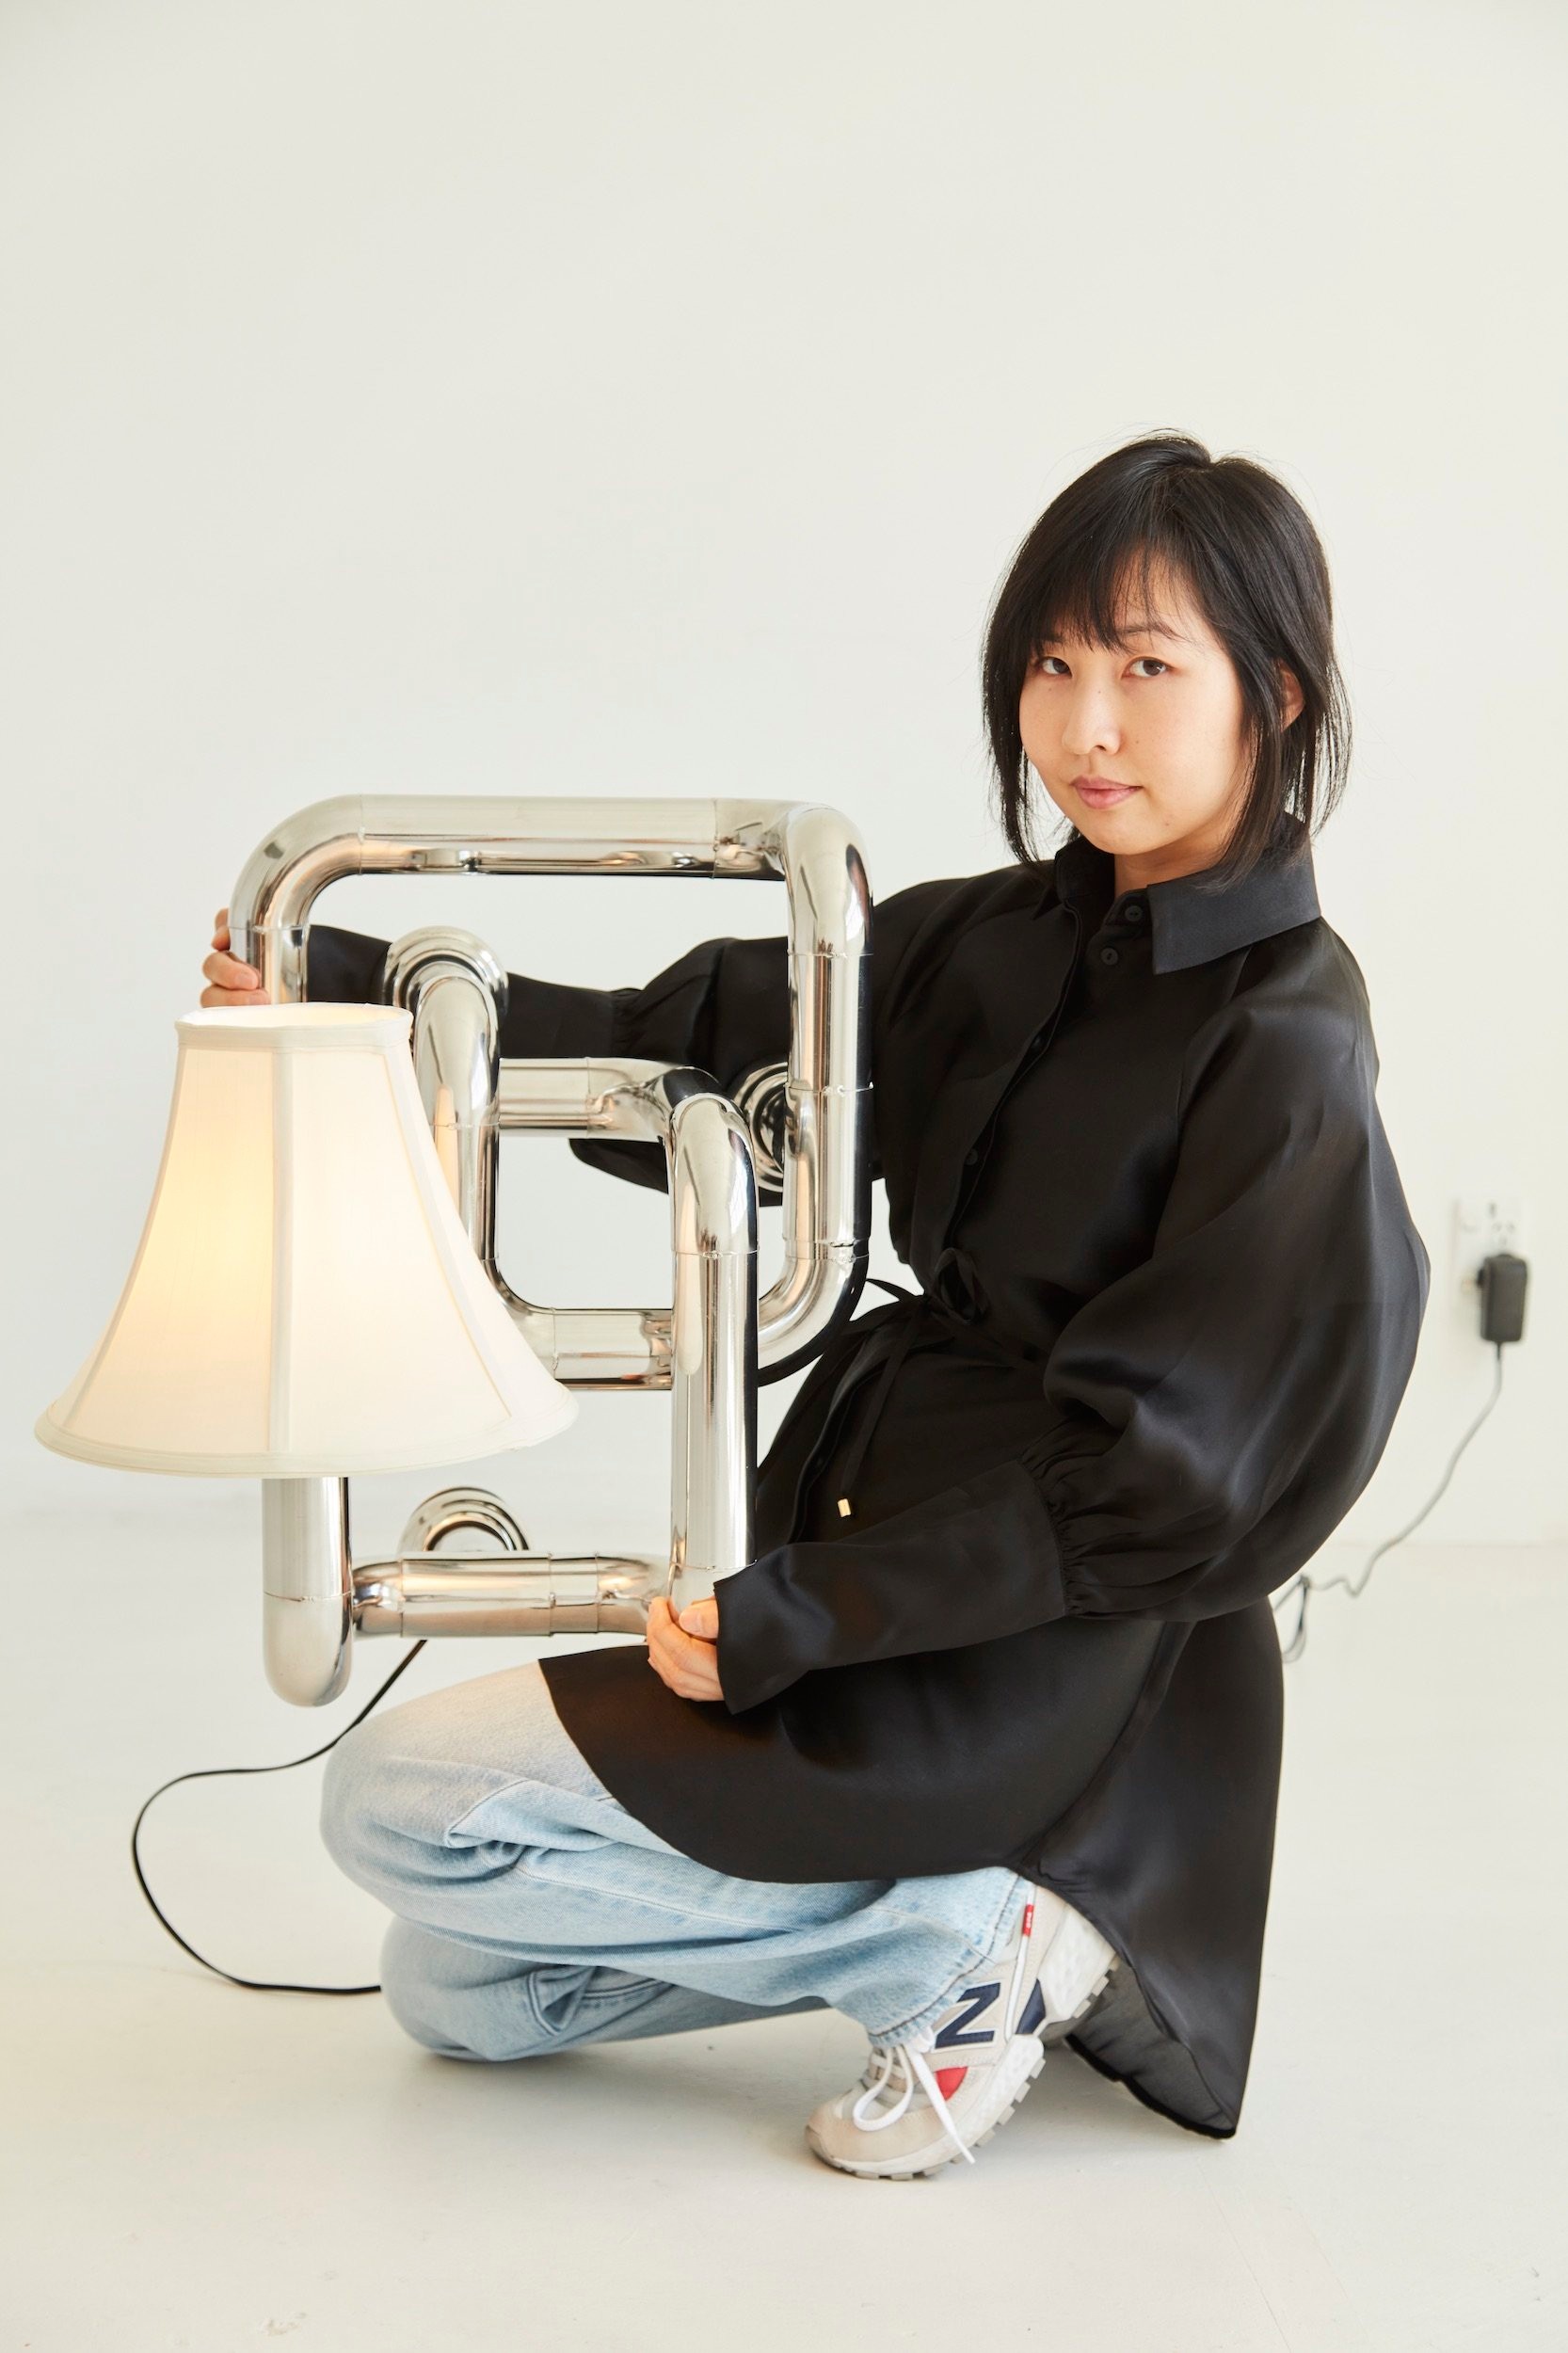 A woman with black hair kneels while holding a sculpture bent from shiny steel pipe with an illuminated lamp shade